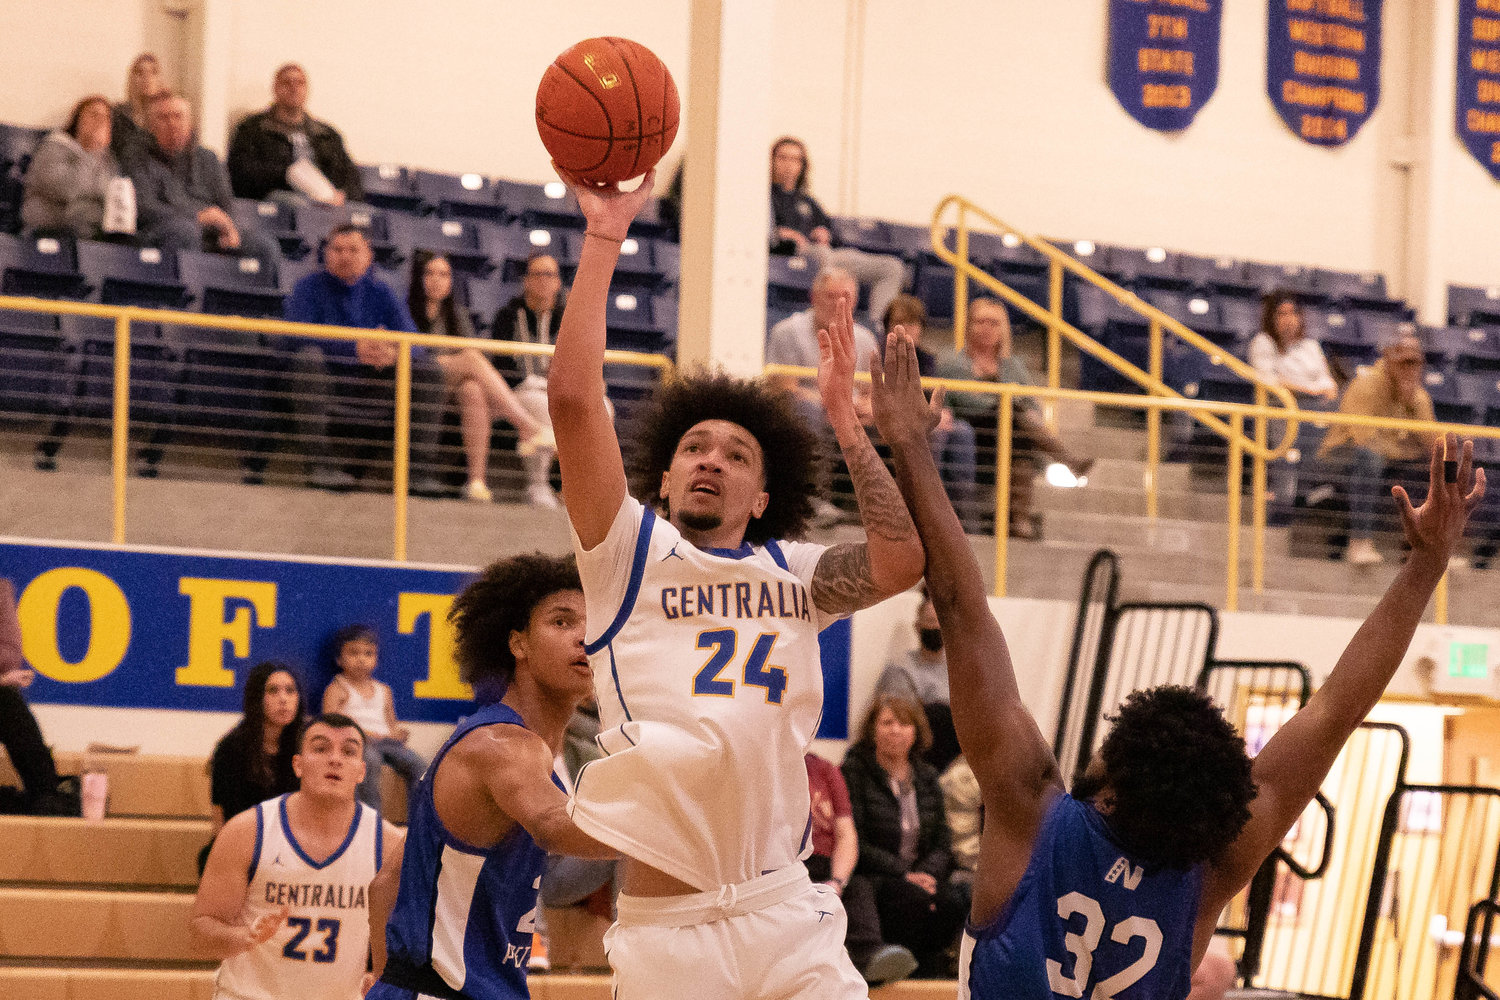 Centralia College forward Deshawn Keperling takes a shot against South Puget Sound Jan. 14 at Michael Smith Gym.